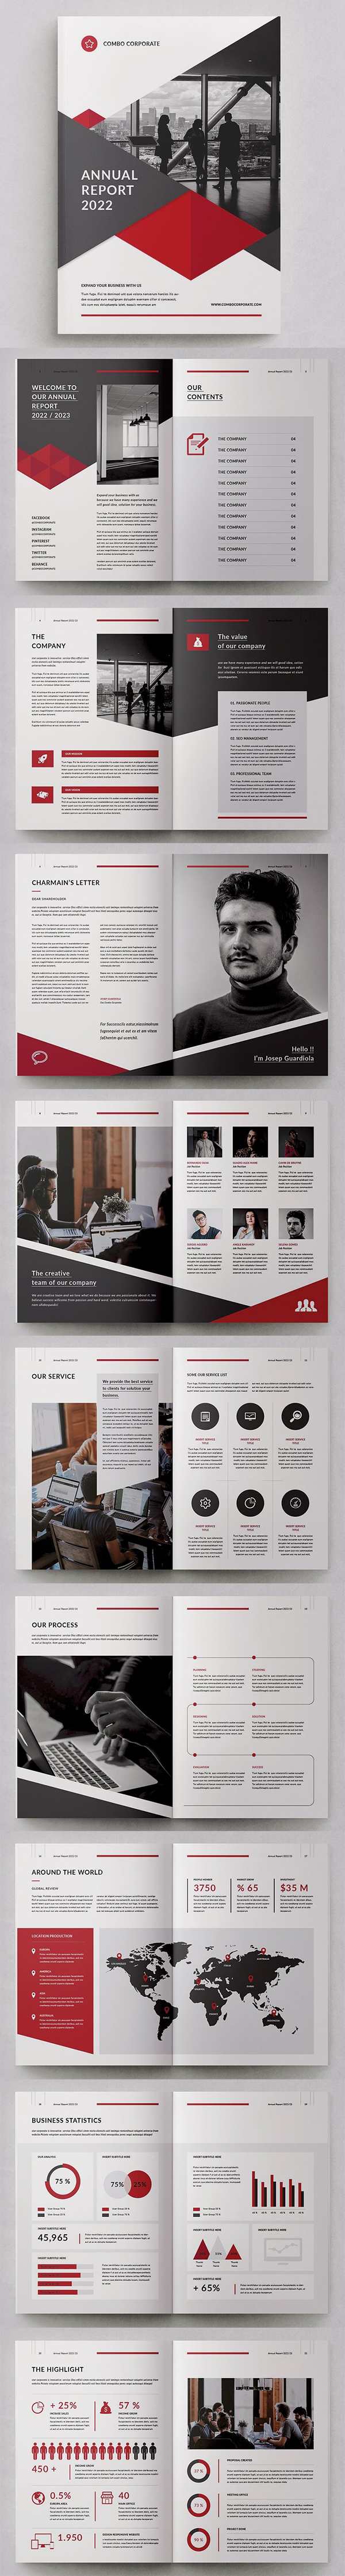 Awesome Annual Report Template